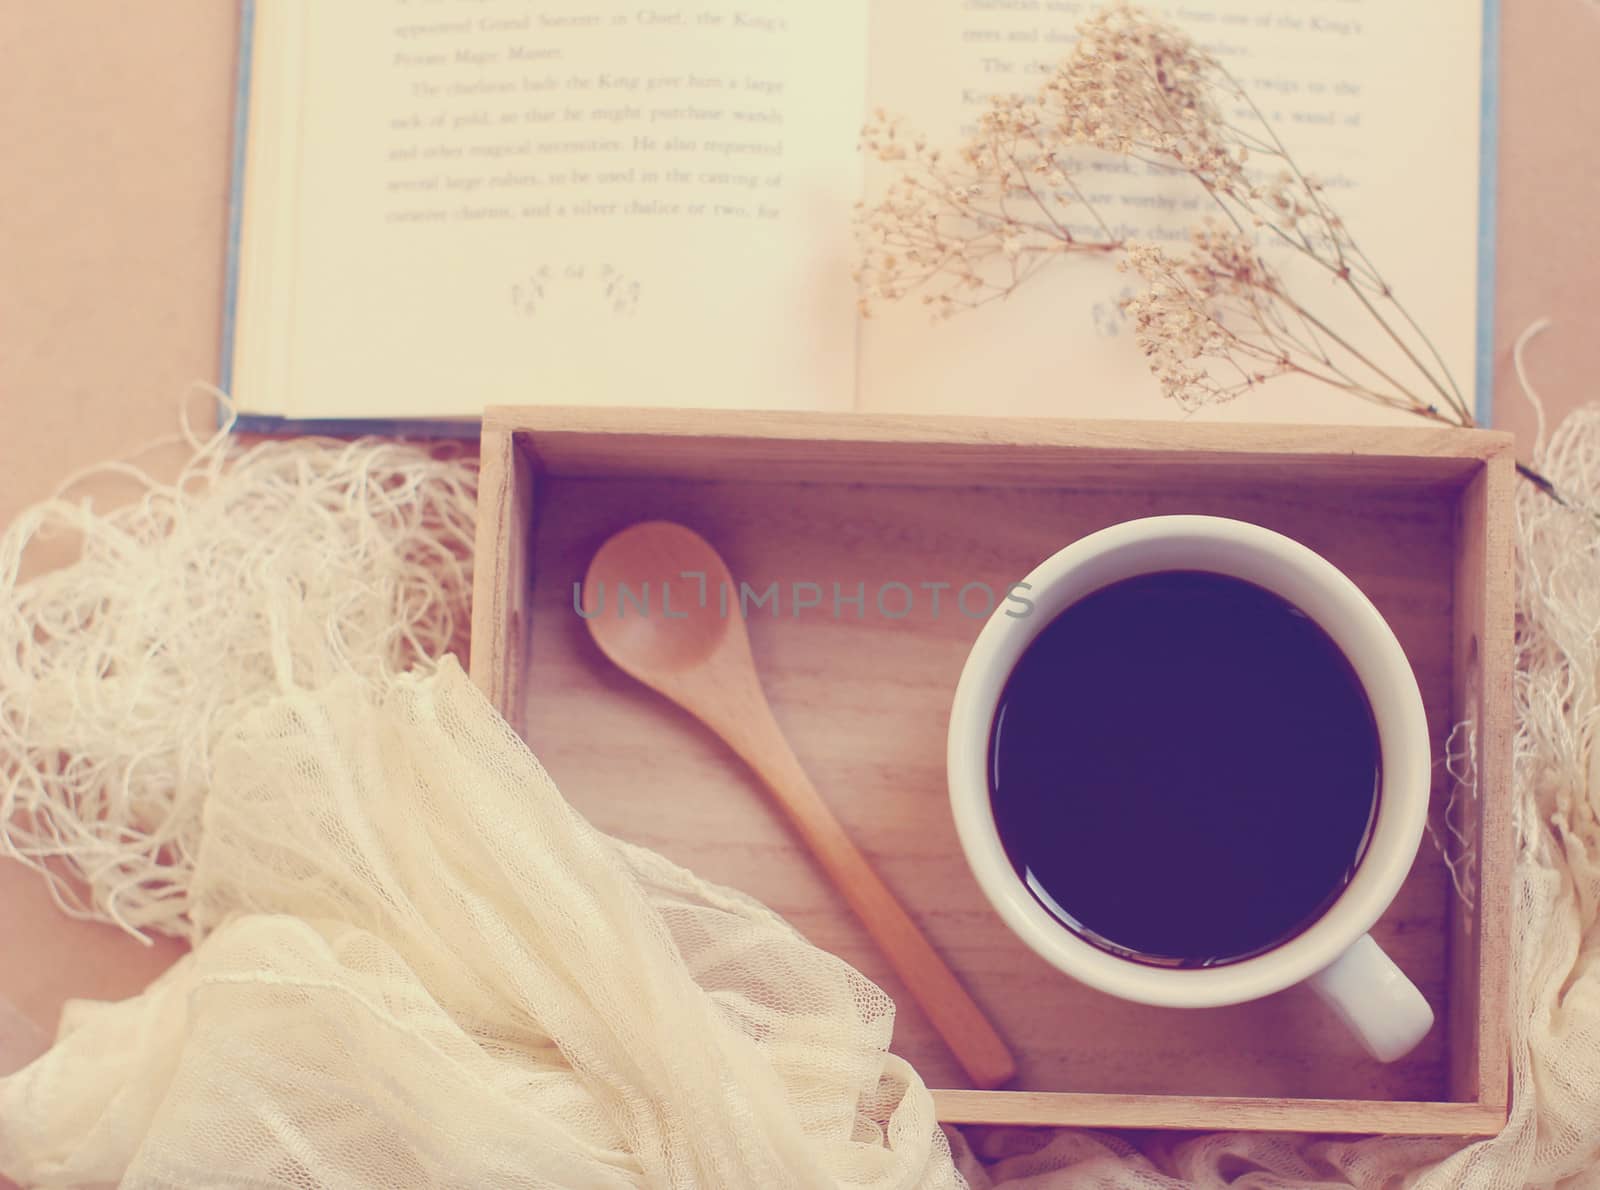 Black coffee and spoon on wooden tray with book, retro filter ef by nuchylee